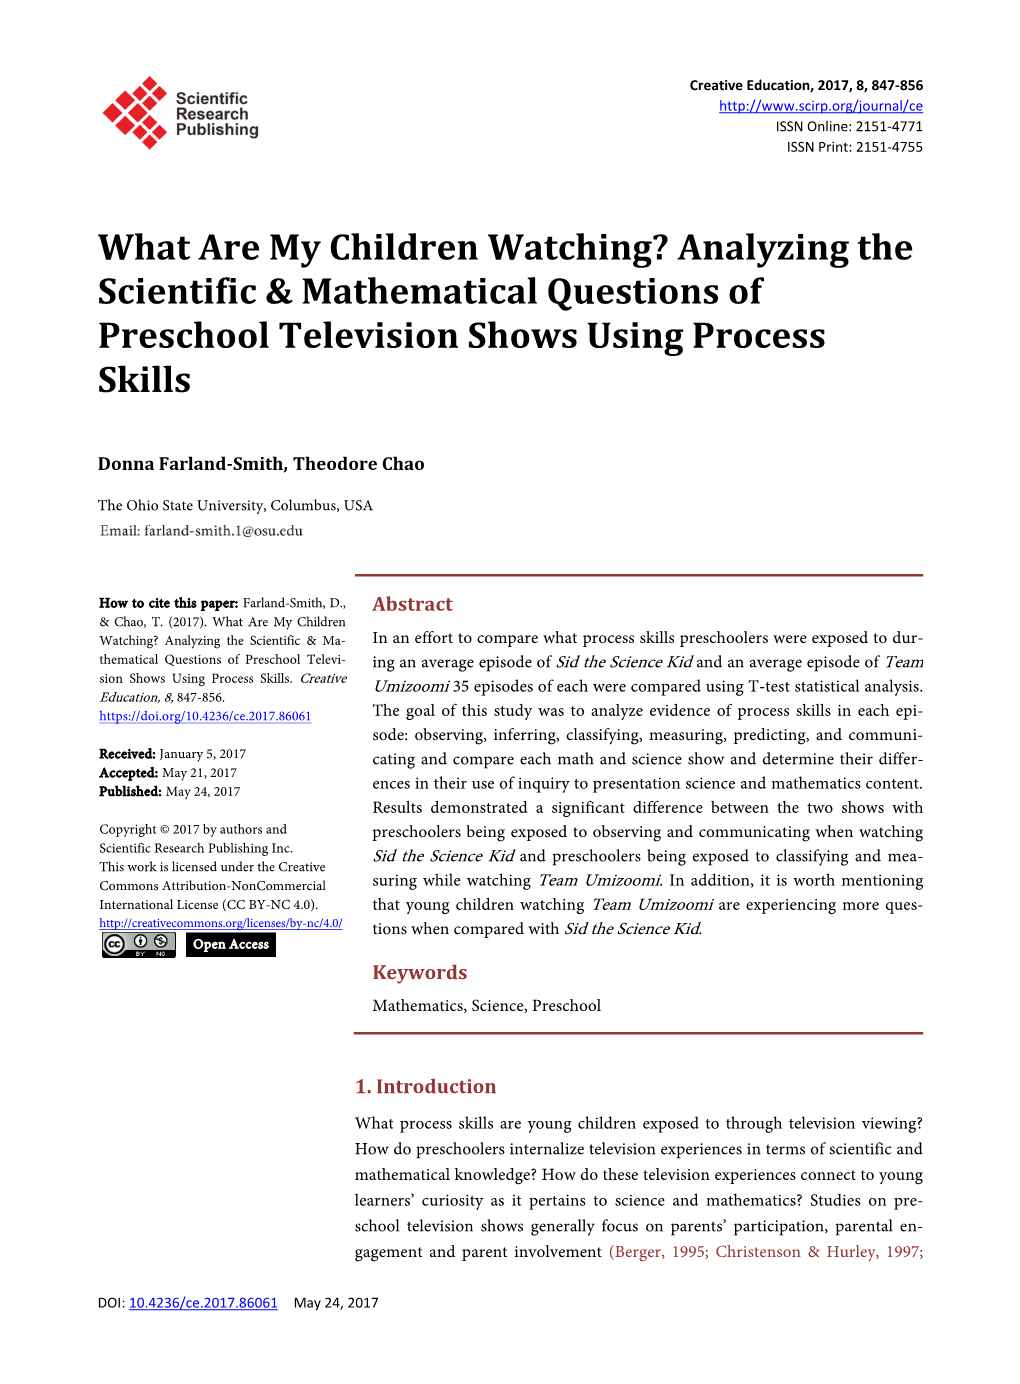 What Are My Children Watching? Analyzing the Scientific & Mathematical Questions of Preschool Television Shows Using Process